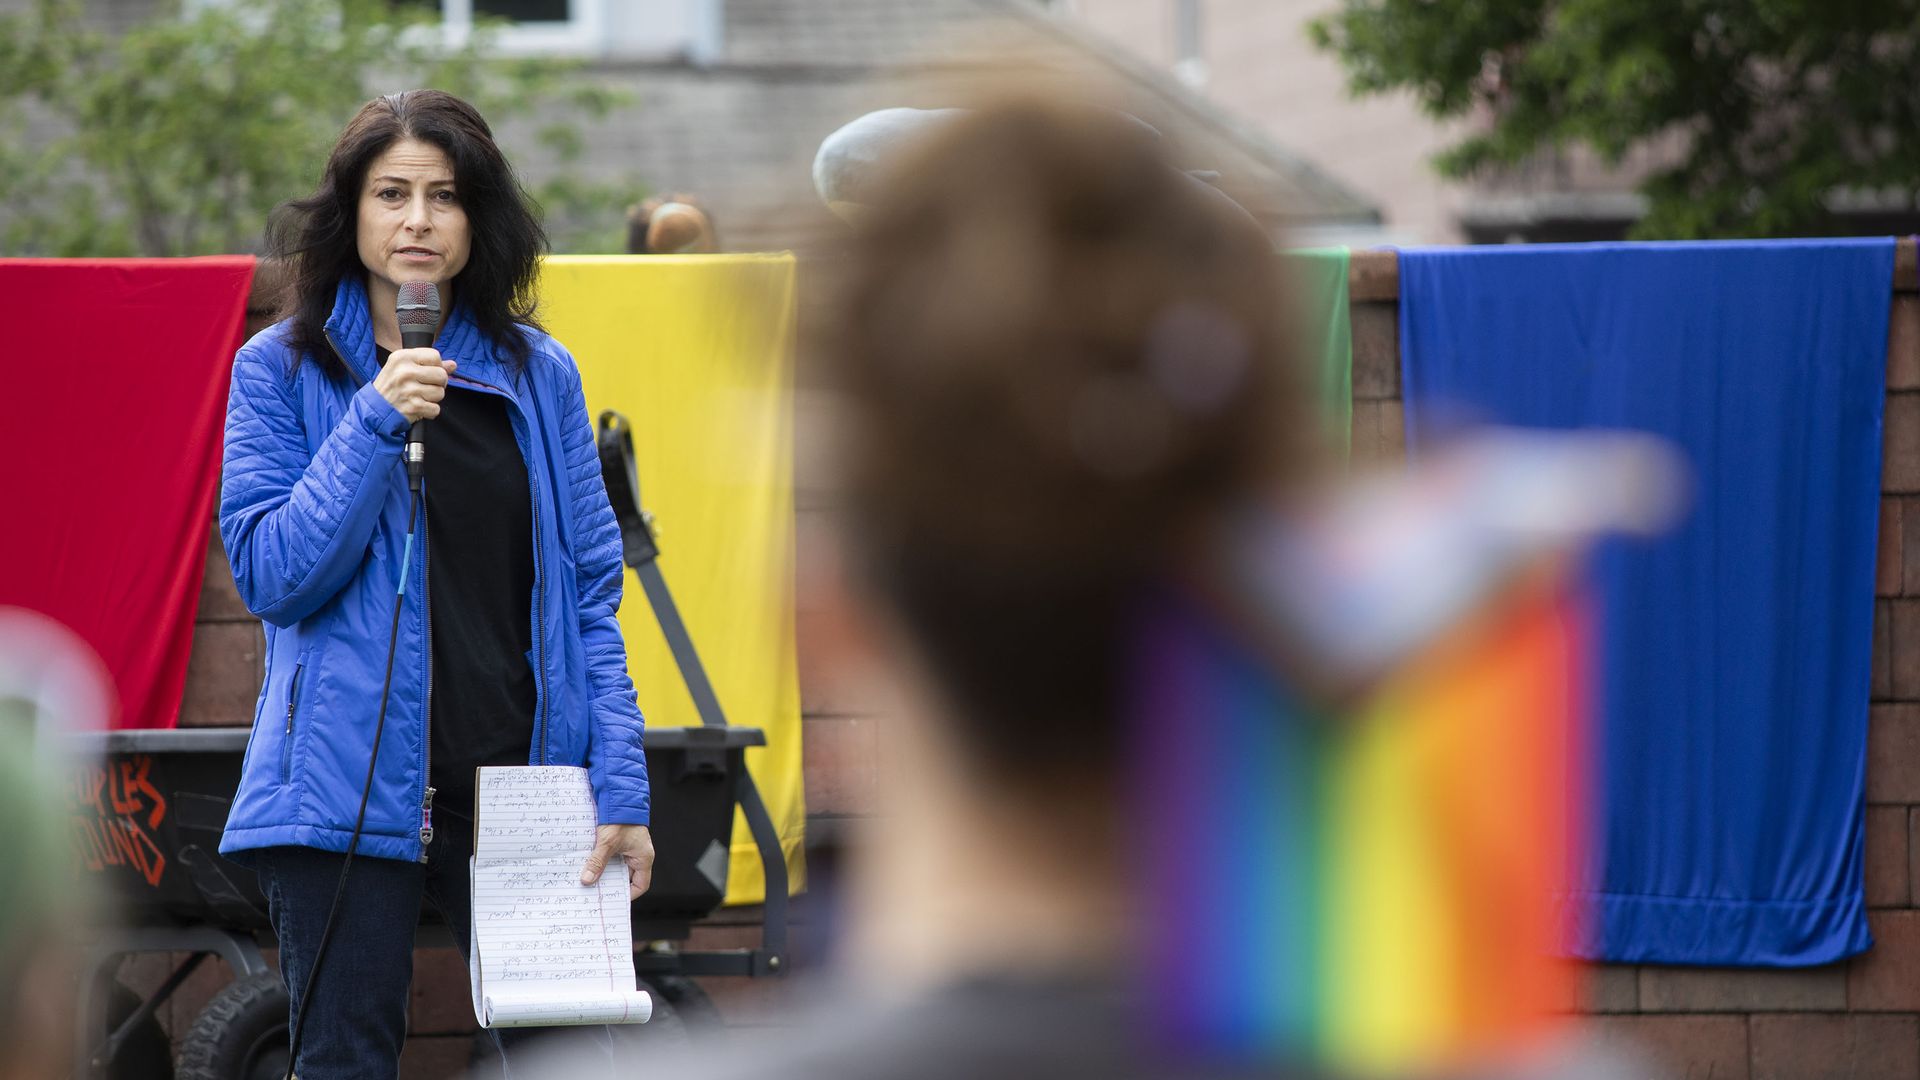 Michigan Attorney General Dana Nessel speaks to protesters who oppose the City of Hamtramck's recent resolution banning the flying of LGBTQ+ flags, political flags, and flags symbolizing any race or religion on City property, at City Hall on June 24, 2023 in Hamtramck, Michigan